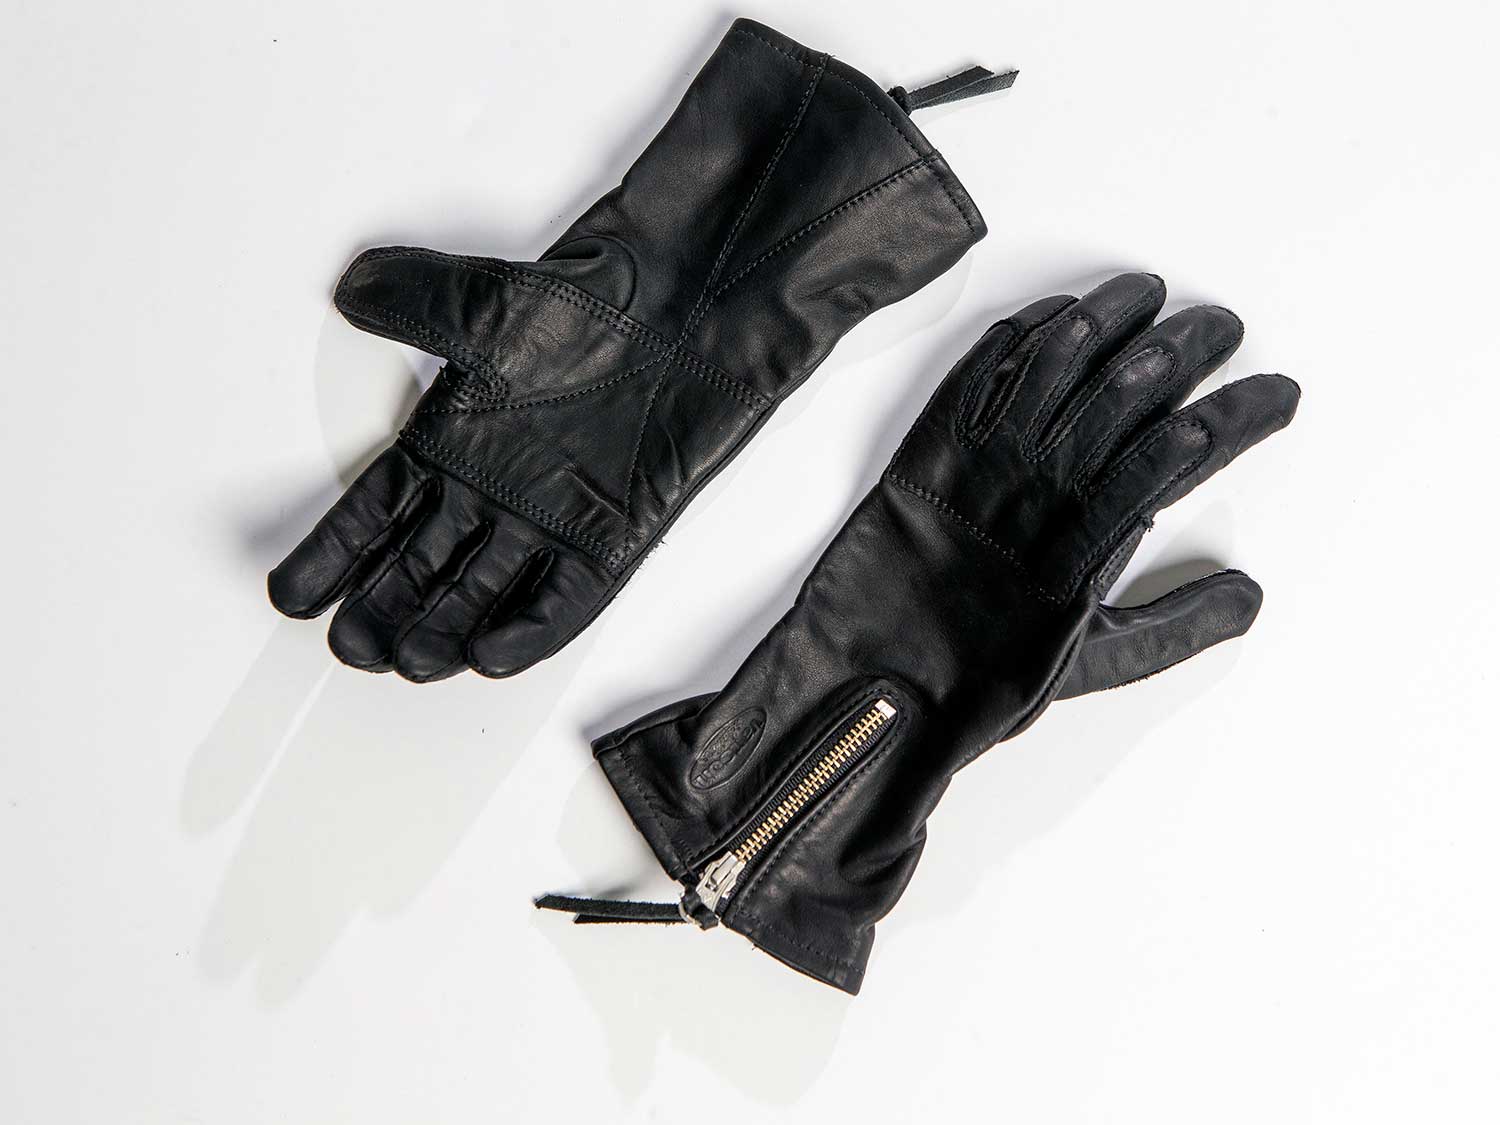 POLARIS Leather Touring Gloves for Women with Reinforced Heel and Hard ...